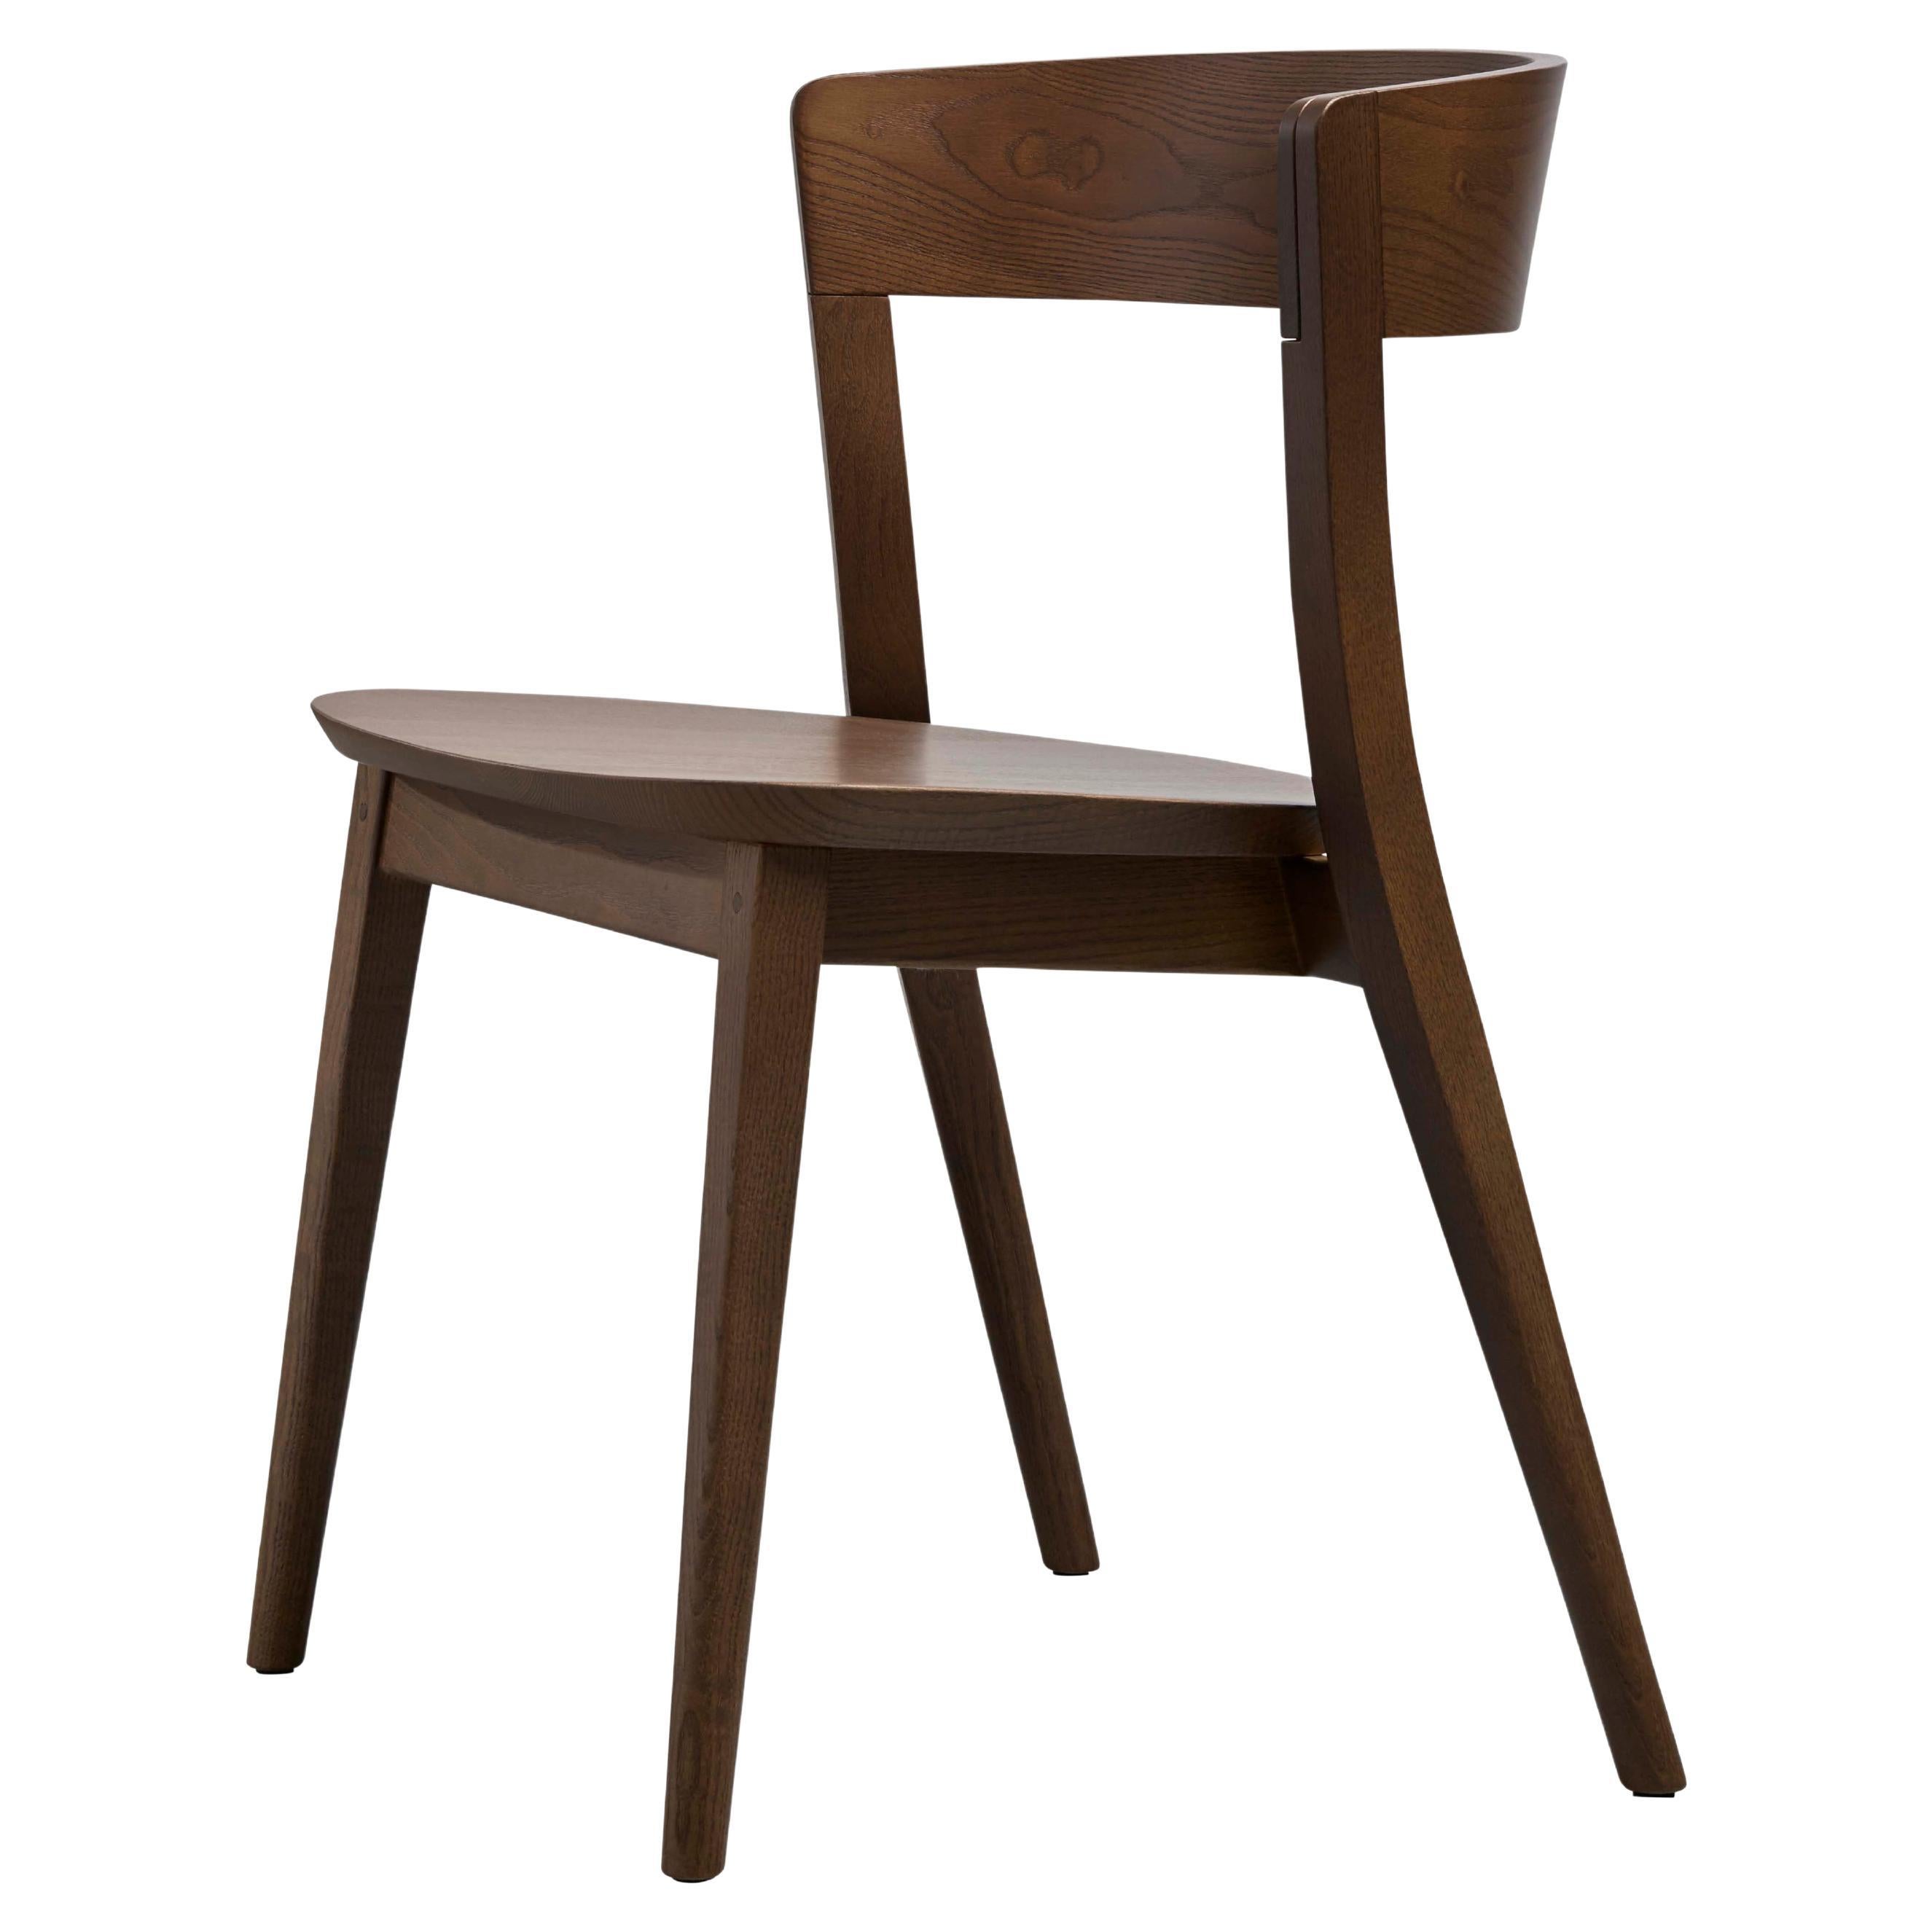 SP01 Clarke Chair in Walnut Stained Ash, Made in Italy